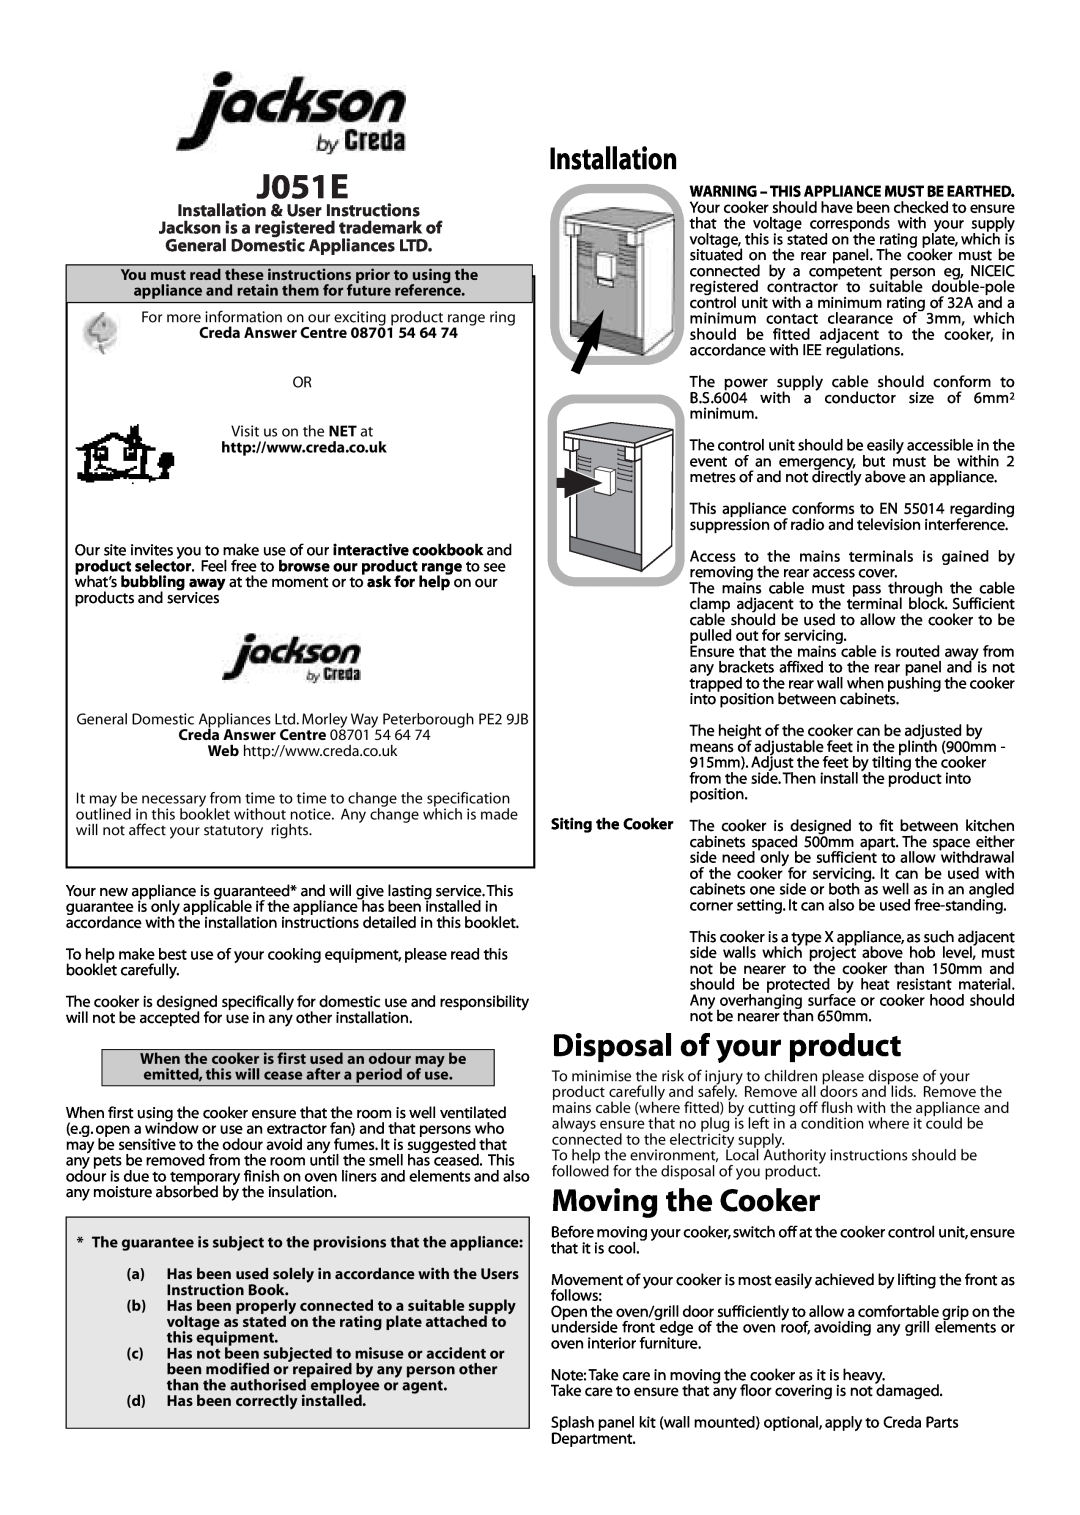 Jackson J051E installation instructions Disposal of your product, Moving the Cooker, Installation 